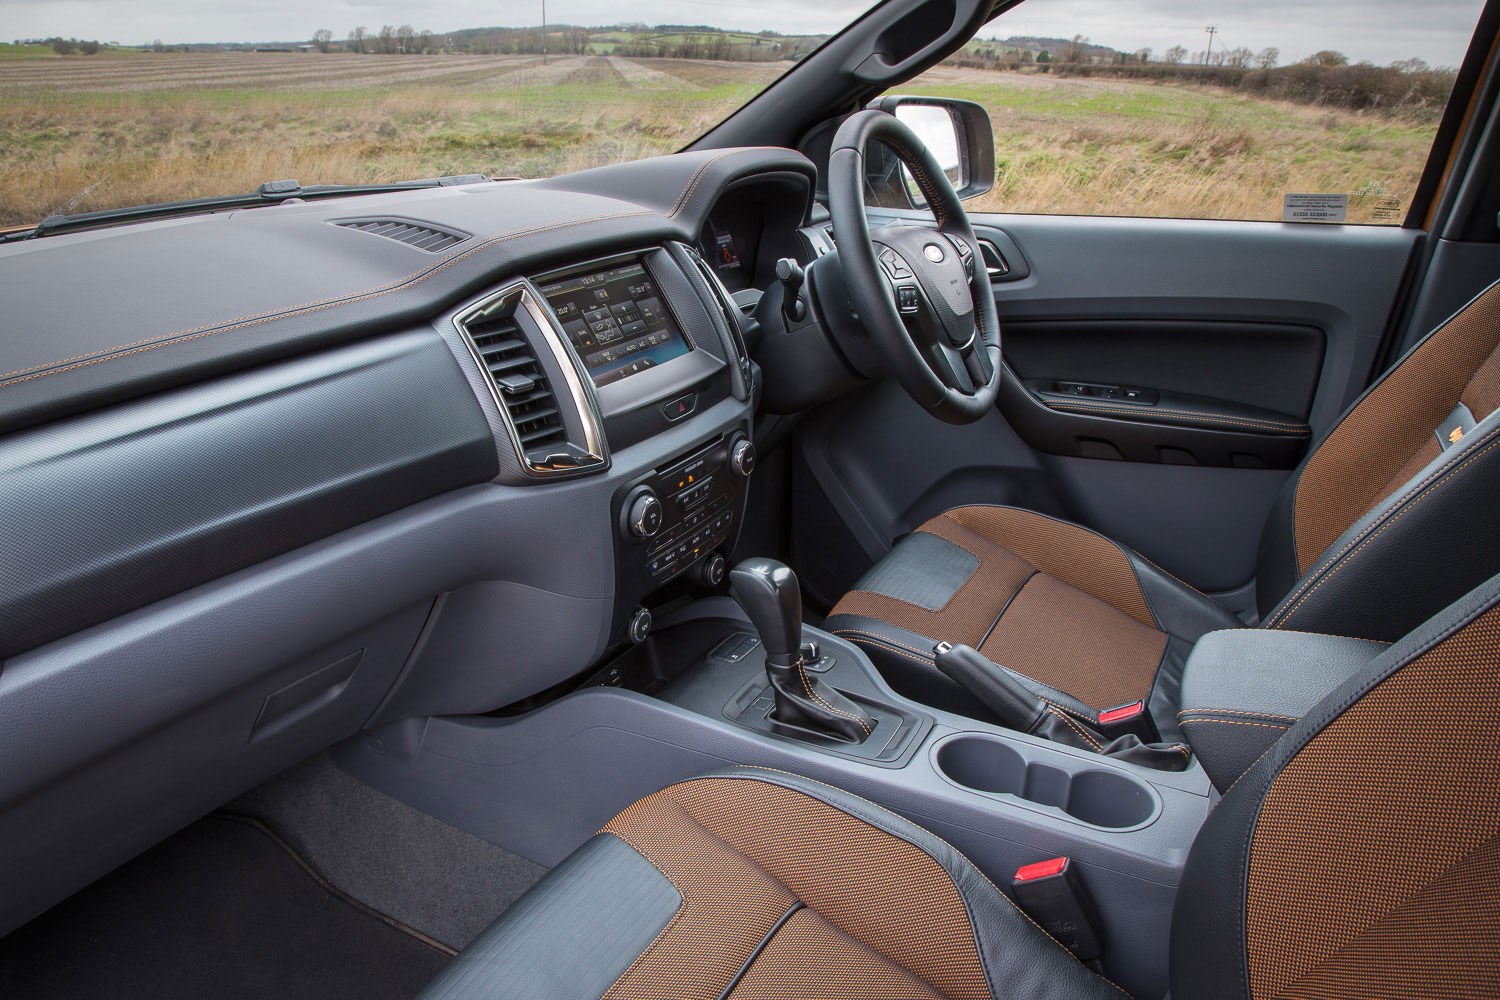 Ford Ranger review - 2016 facelift cab interior side view